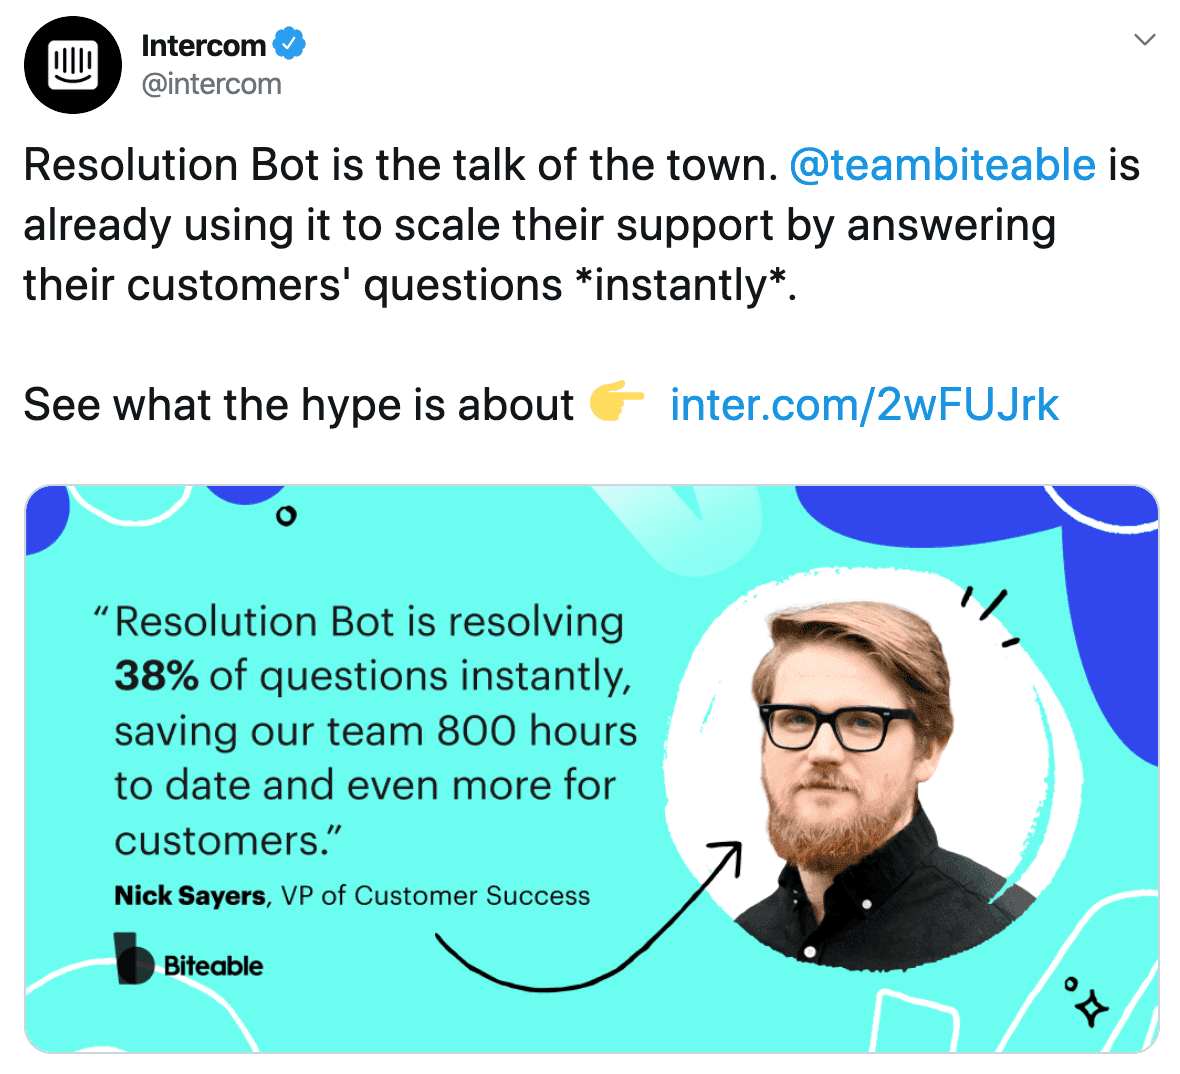 Intercom post on Twitter about Resolution Bot's positive impact